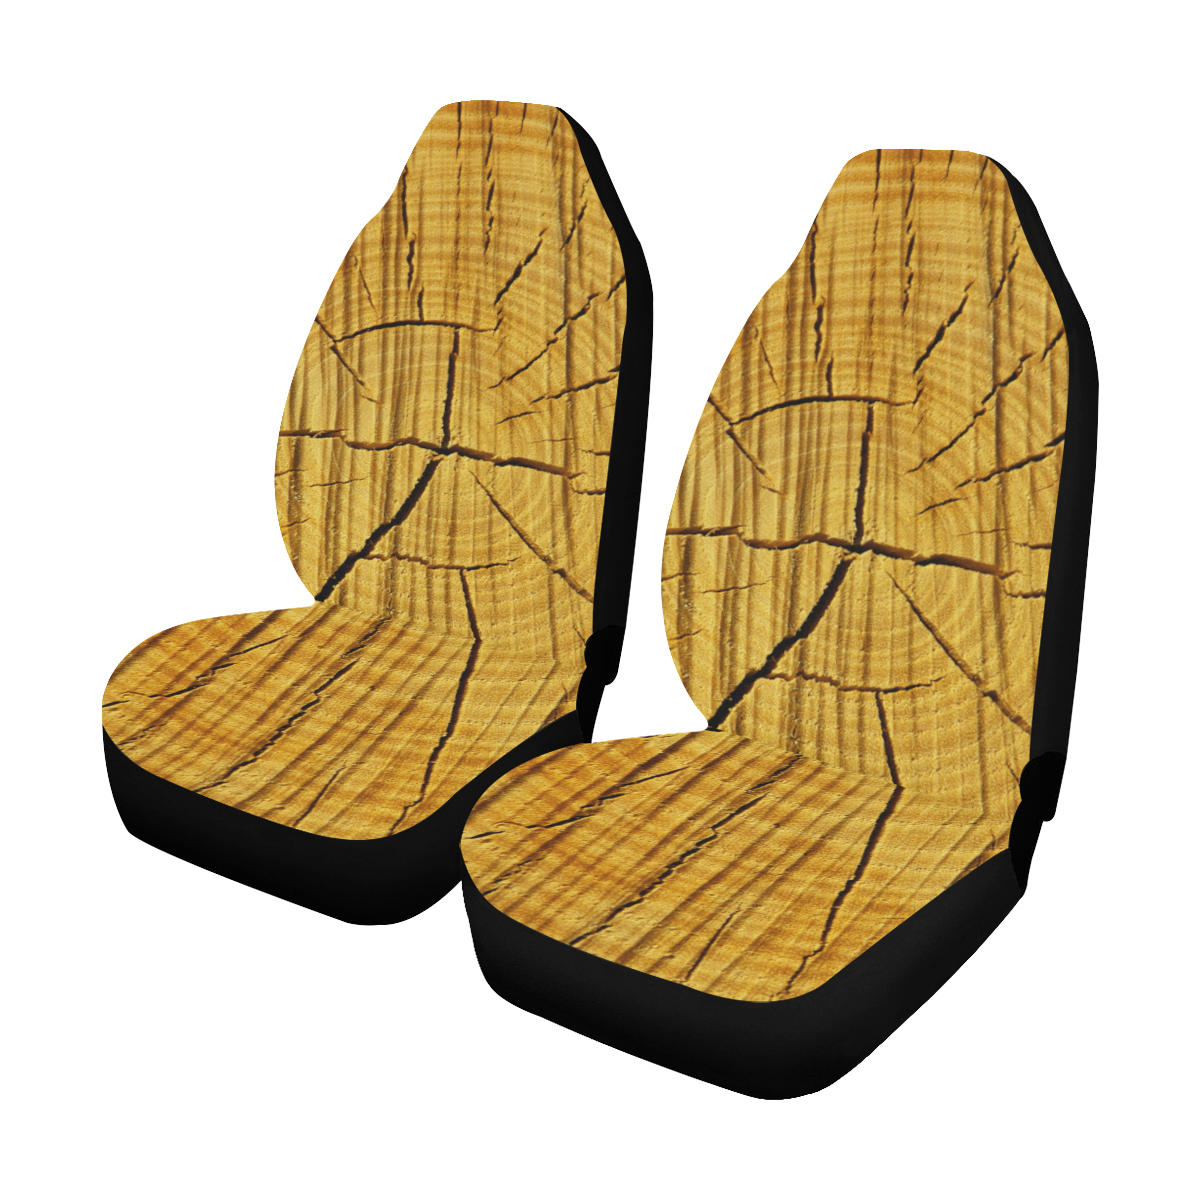 Sun of Wood Car Seat Covers (Set of 2)